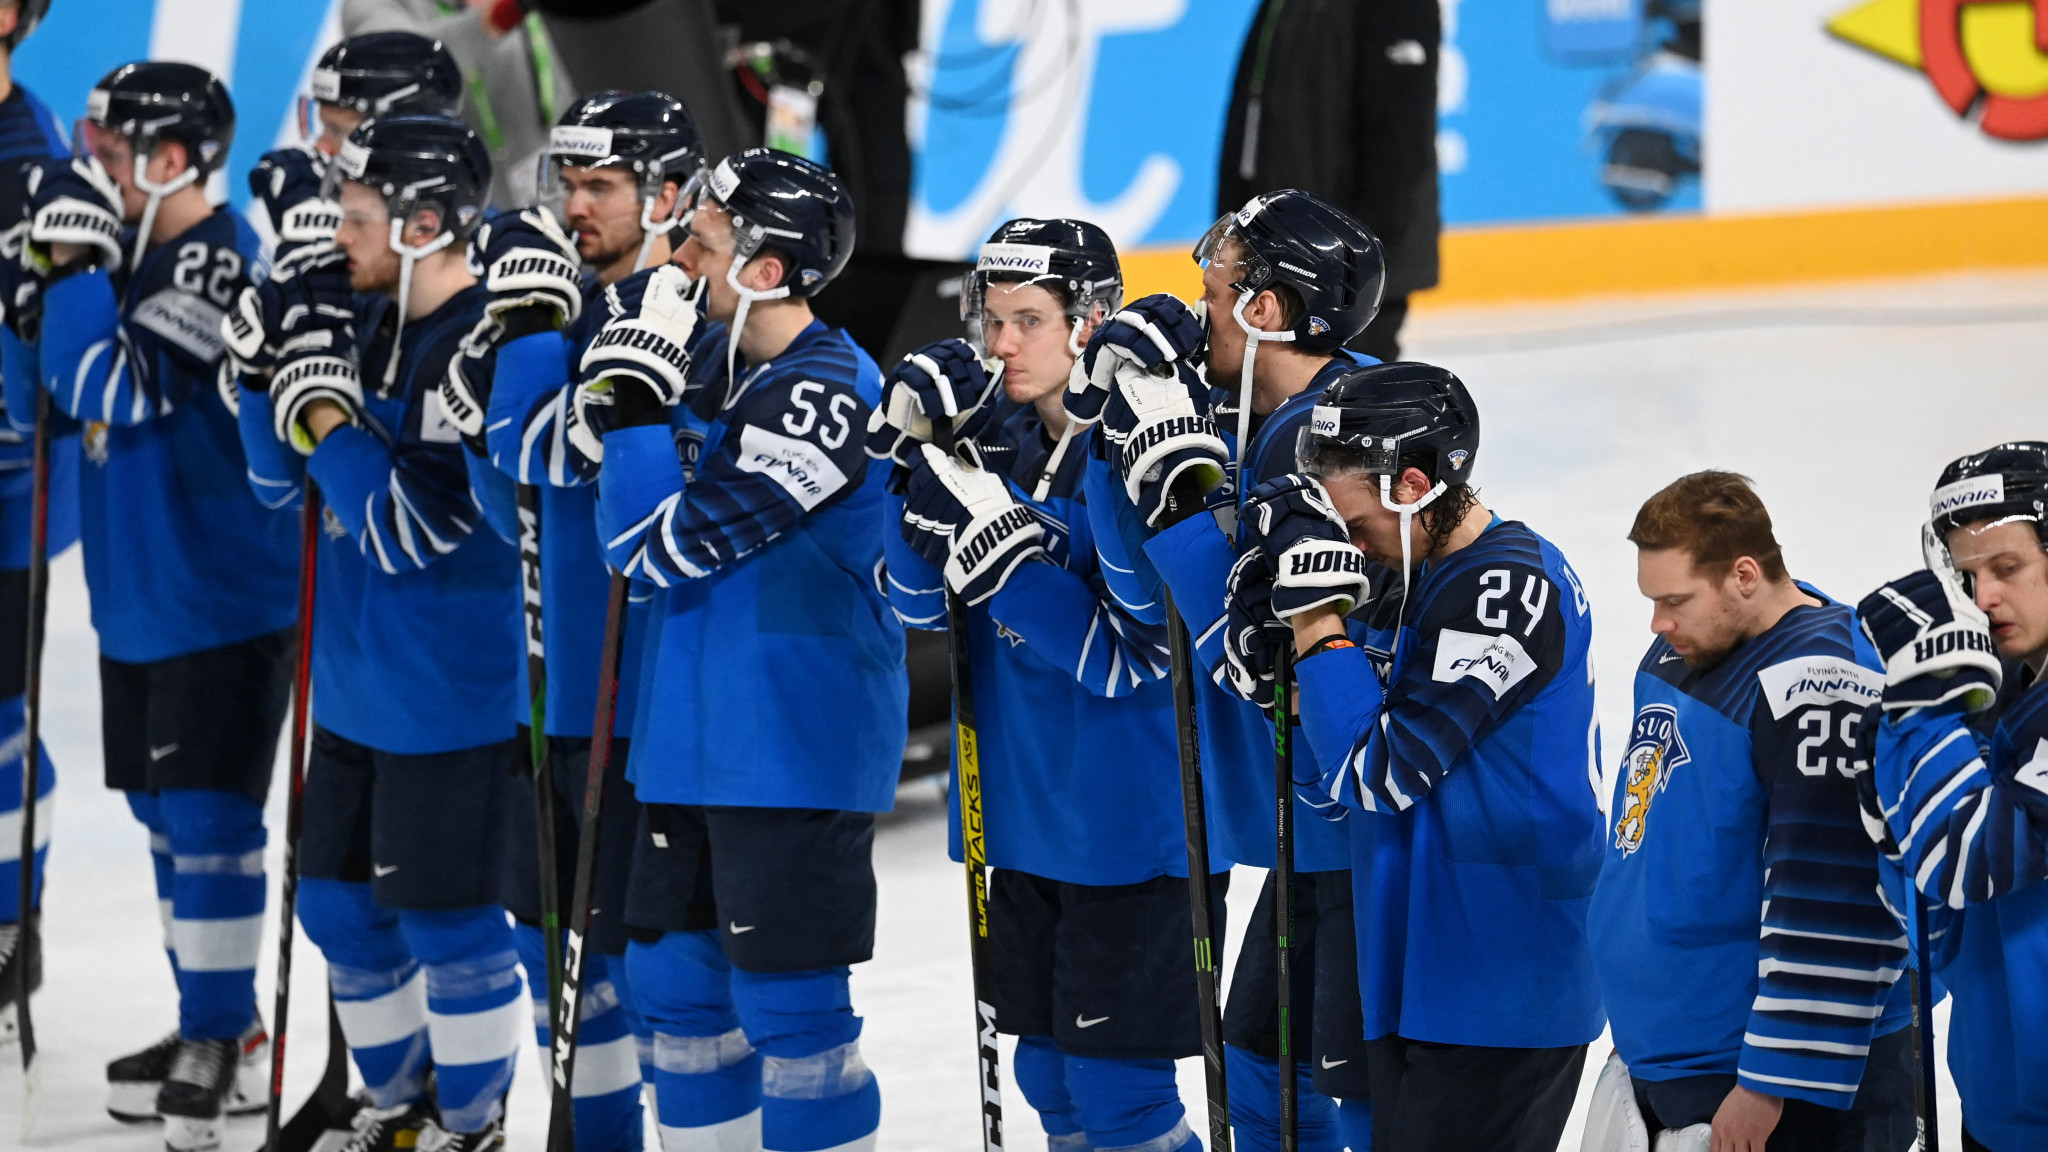 Finland, who have been placed in Group B at the 2022 IIHF Ice Hockey World Championship, will be looking to go one better on home ice next year ©Getty Images